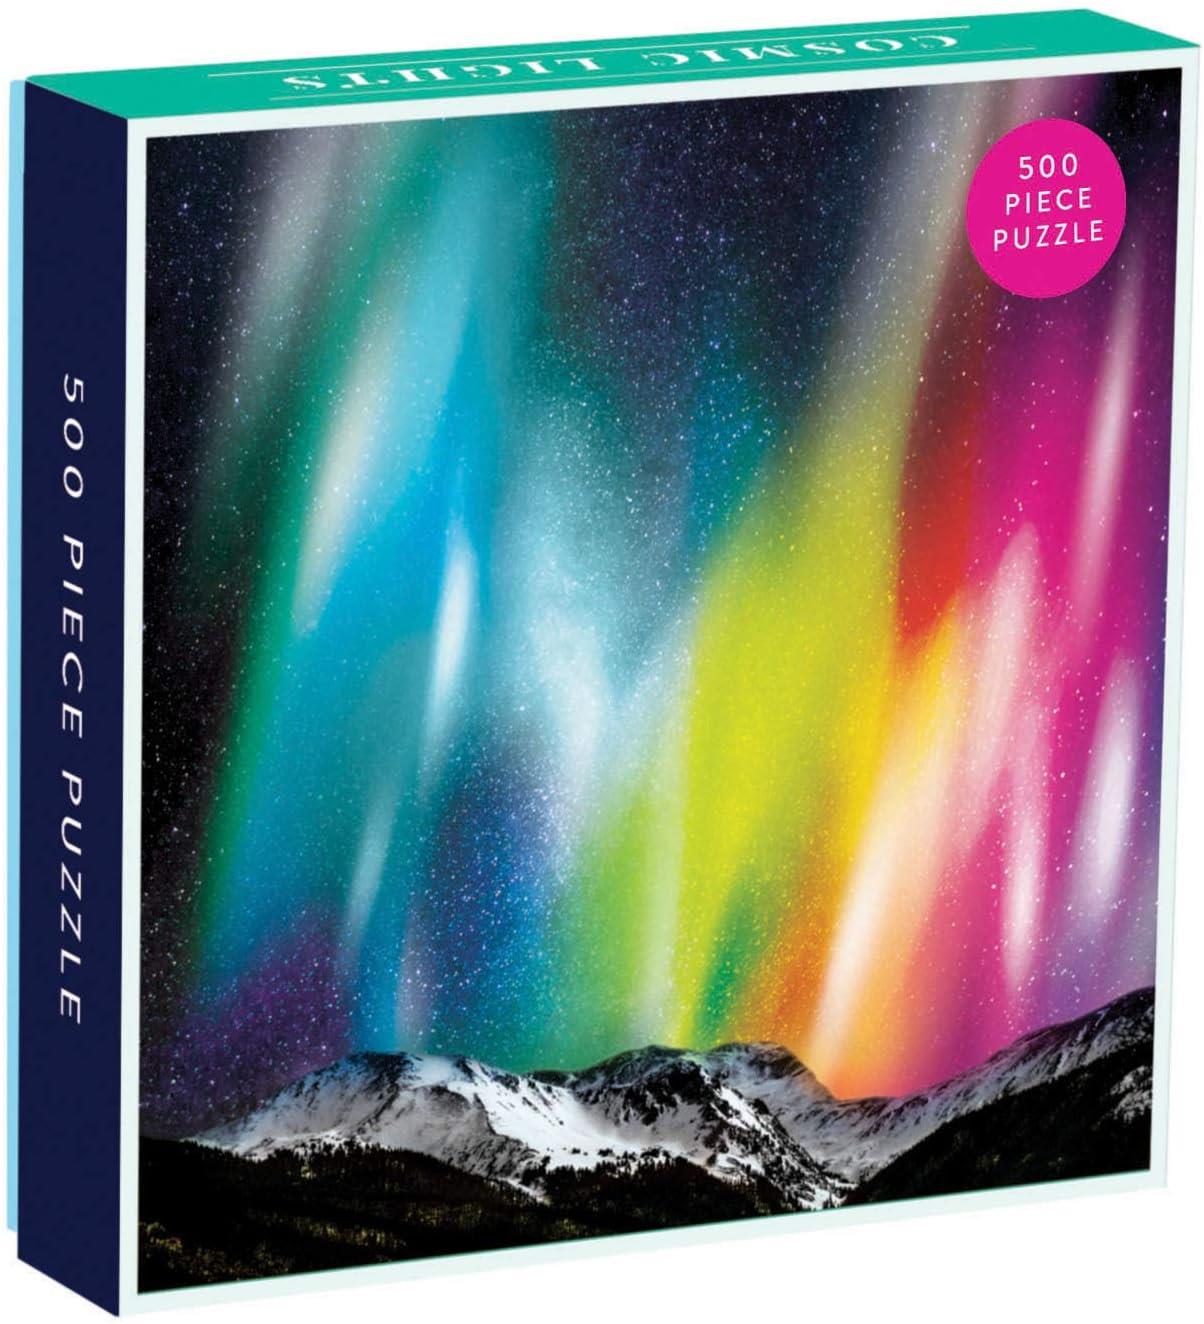 Galison Cosmic Lights Jigsaw Puzzle (500 Pieces)